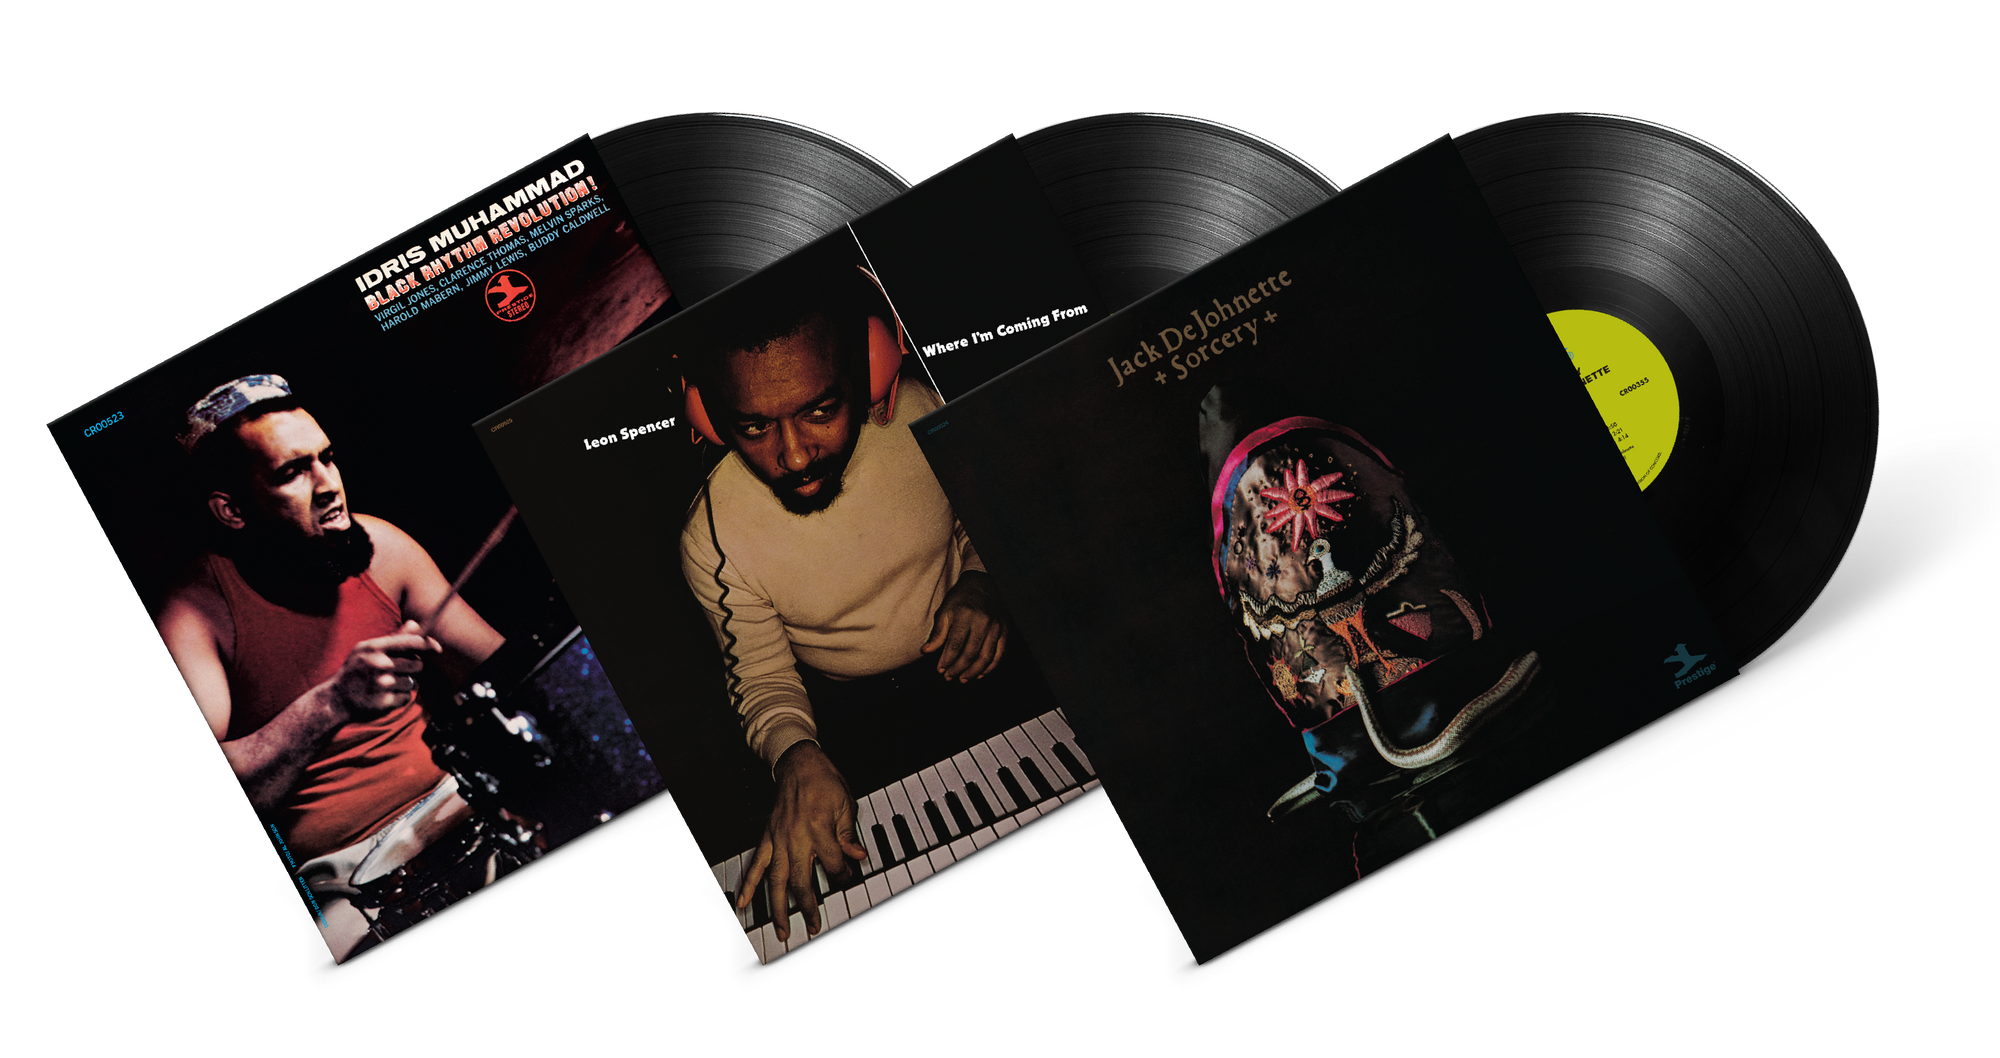 JAZZ DISPENSARY ANNOUNCES A TRIPLE GROOVE OF TOP SHELF SERIES REISSUES